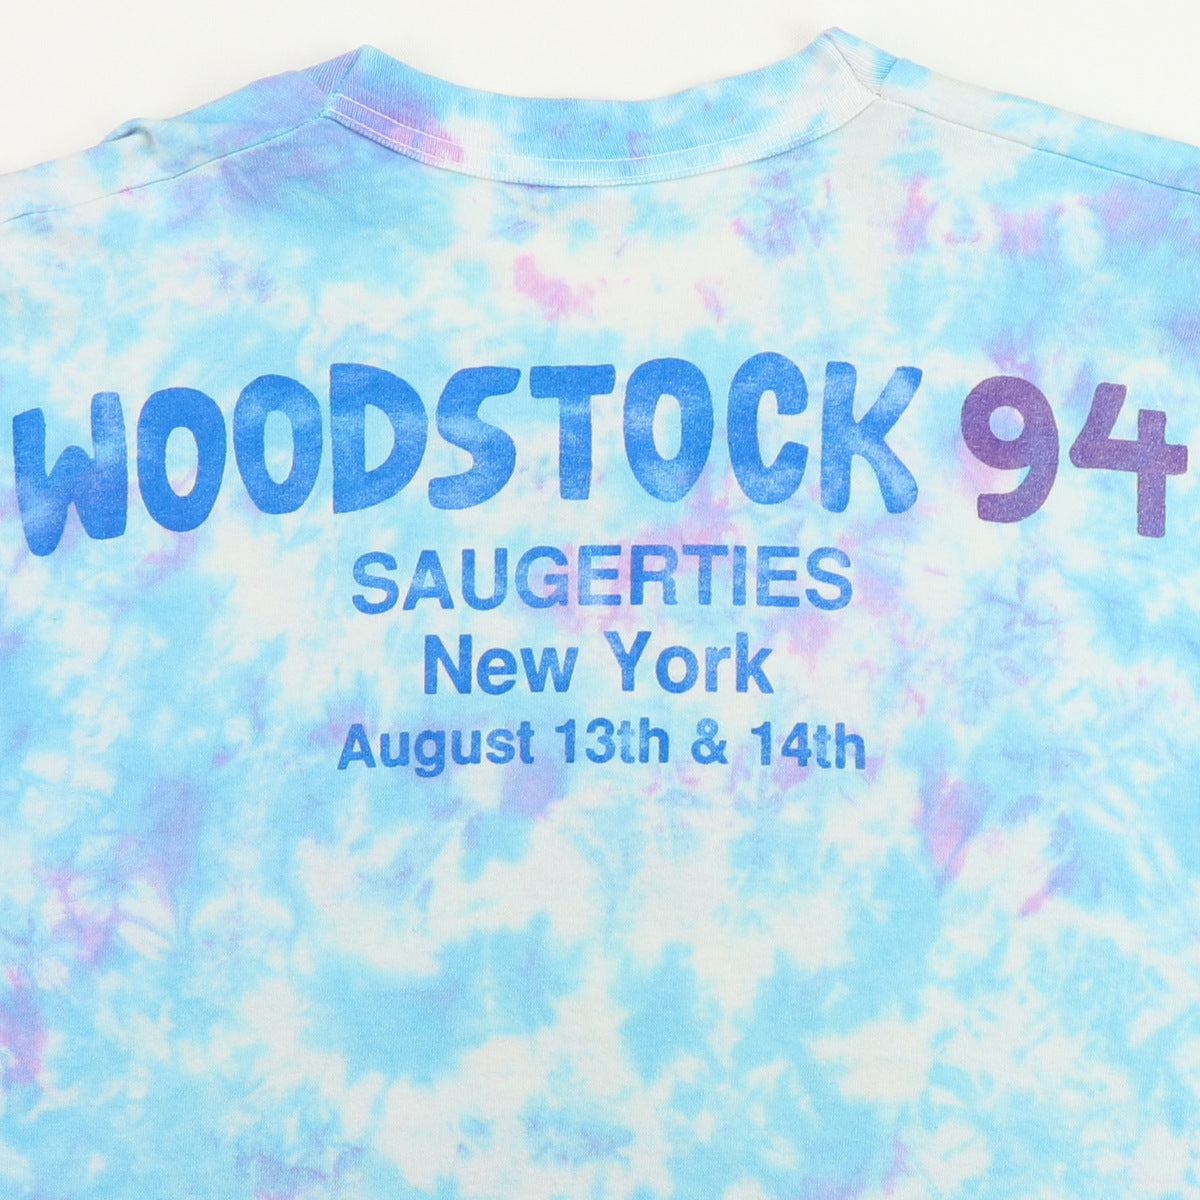 1994 Woodstock 2 Mores Days Of Music & Peace Tie Dye Shirt